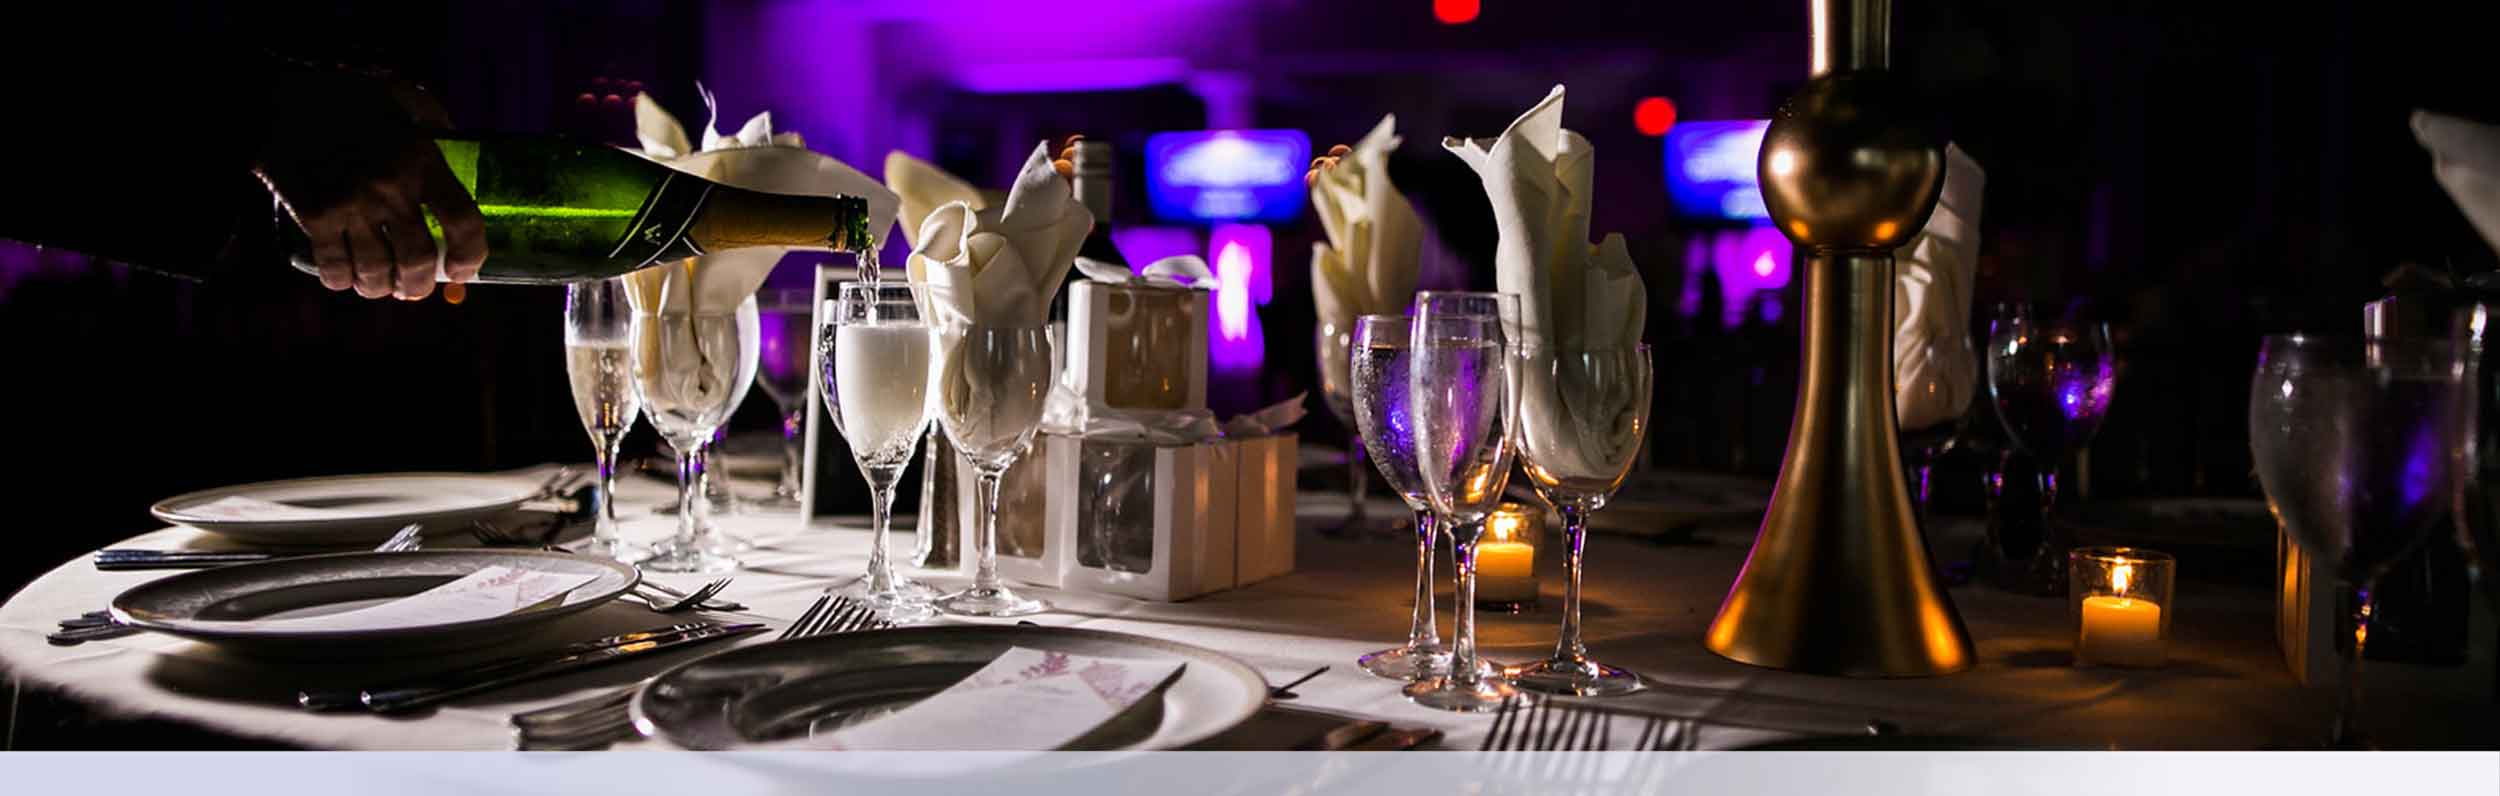 Stirling New Jersey Wedding Catering Server